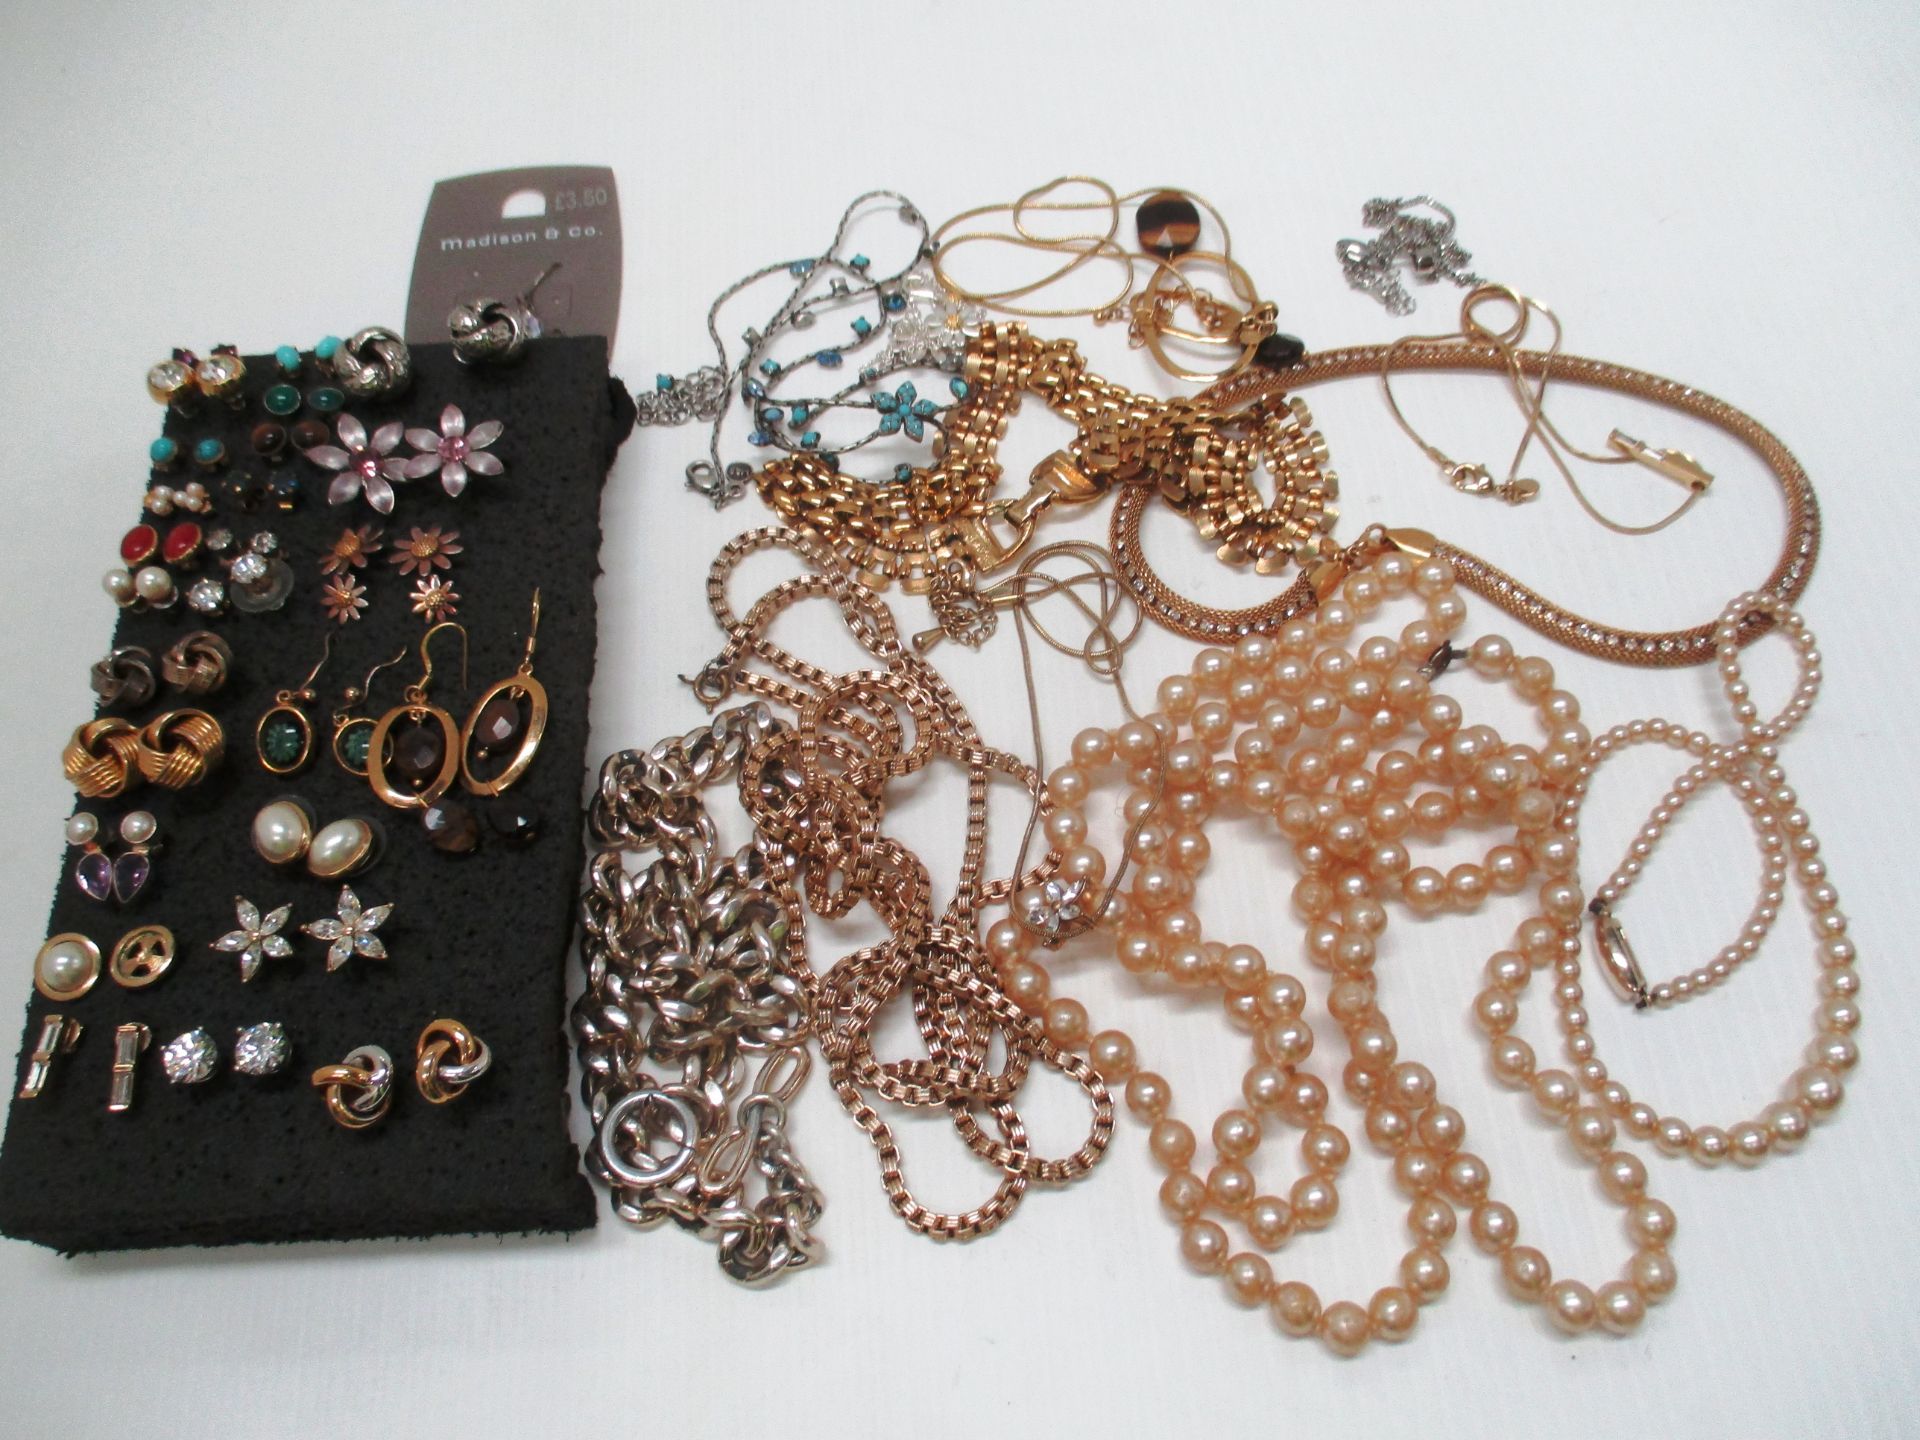 Contents to box - large quantity of assorted pairs of earrings, simulated pearls,